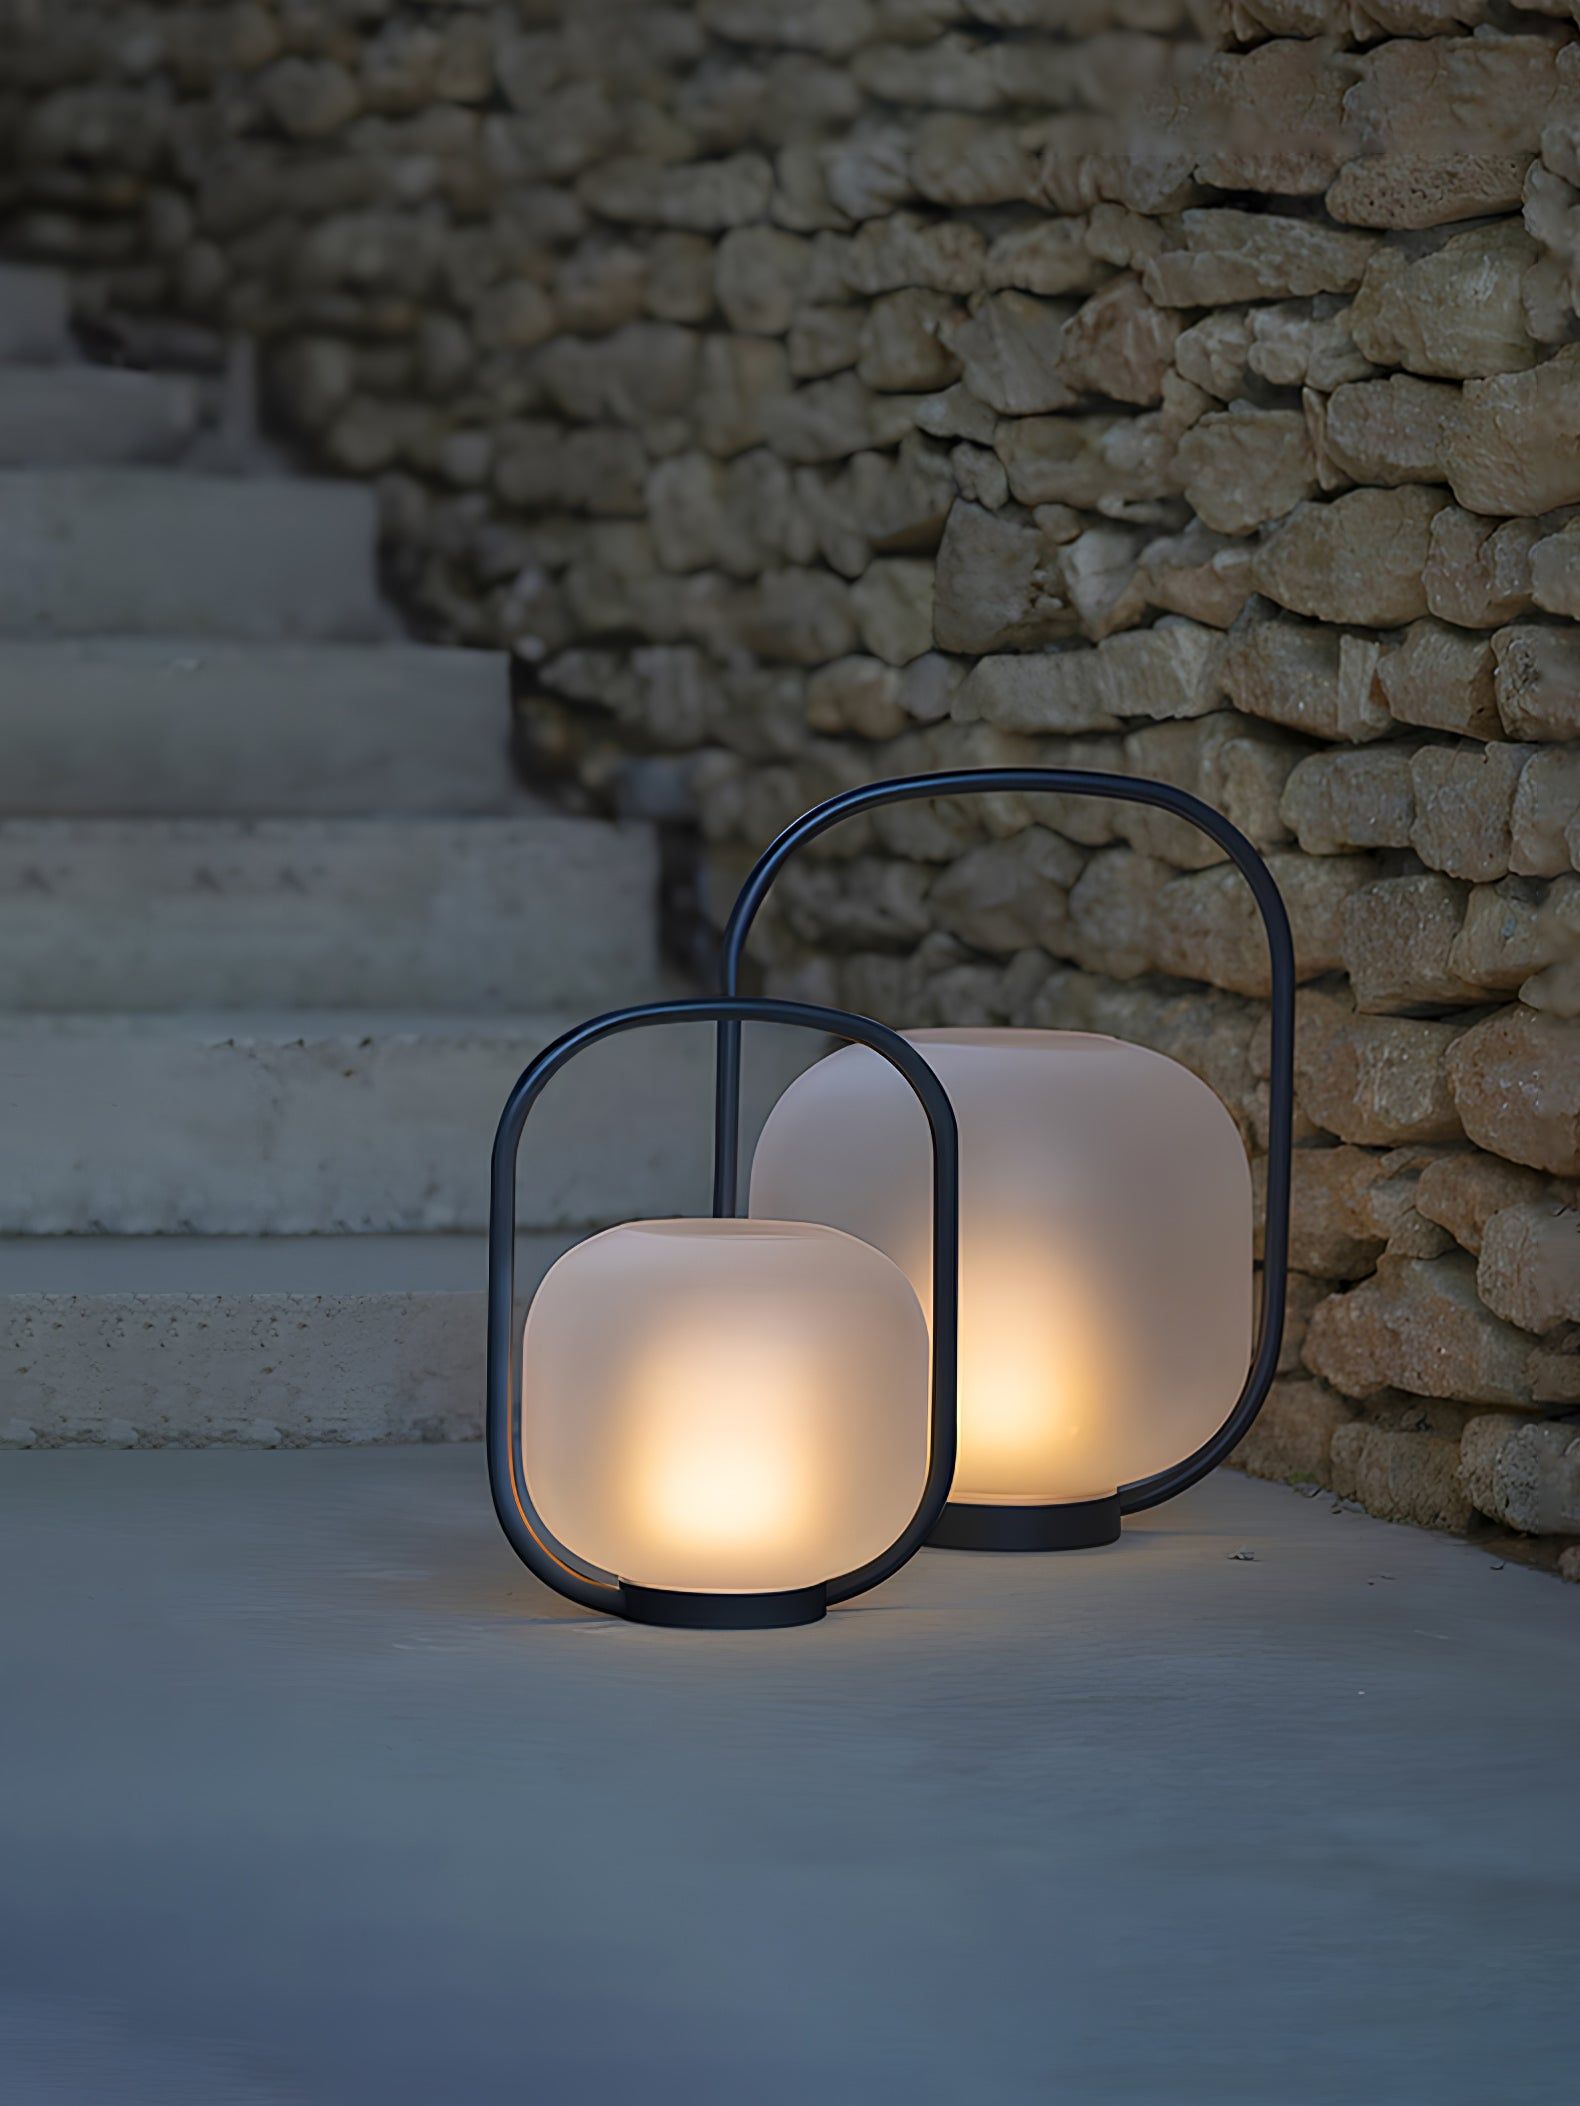 Elegant Outdoor Lamp Stylish Illumination for Your Outdoor Space